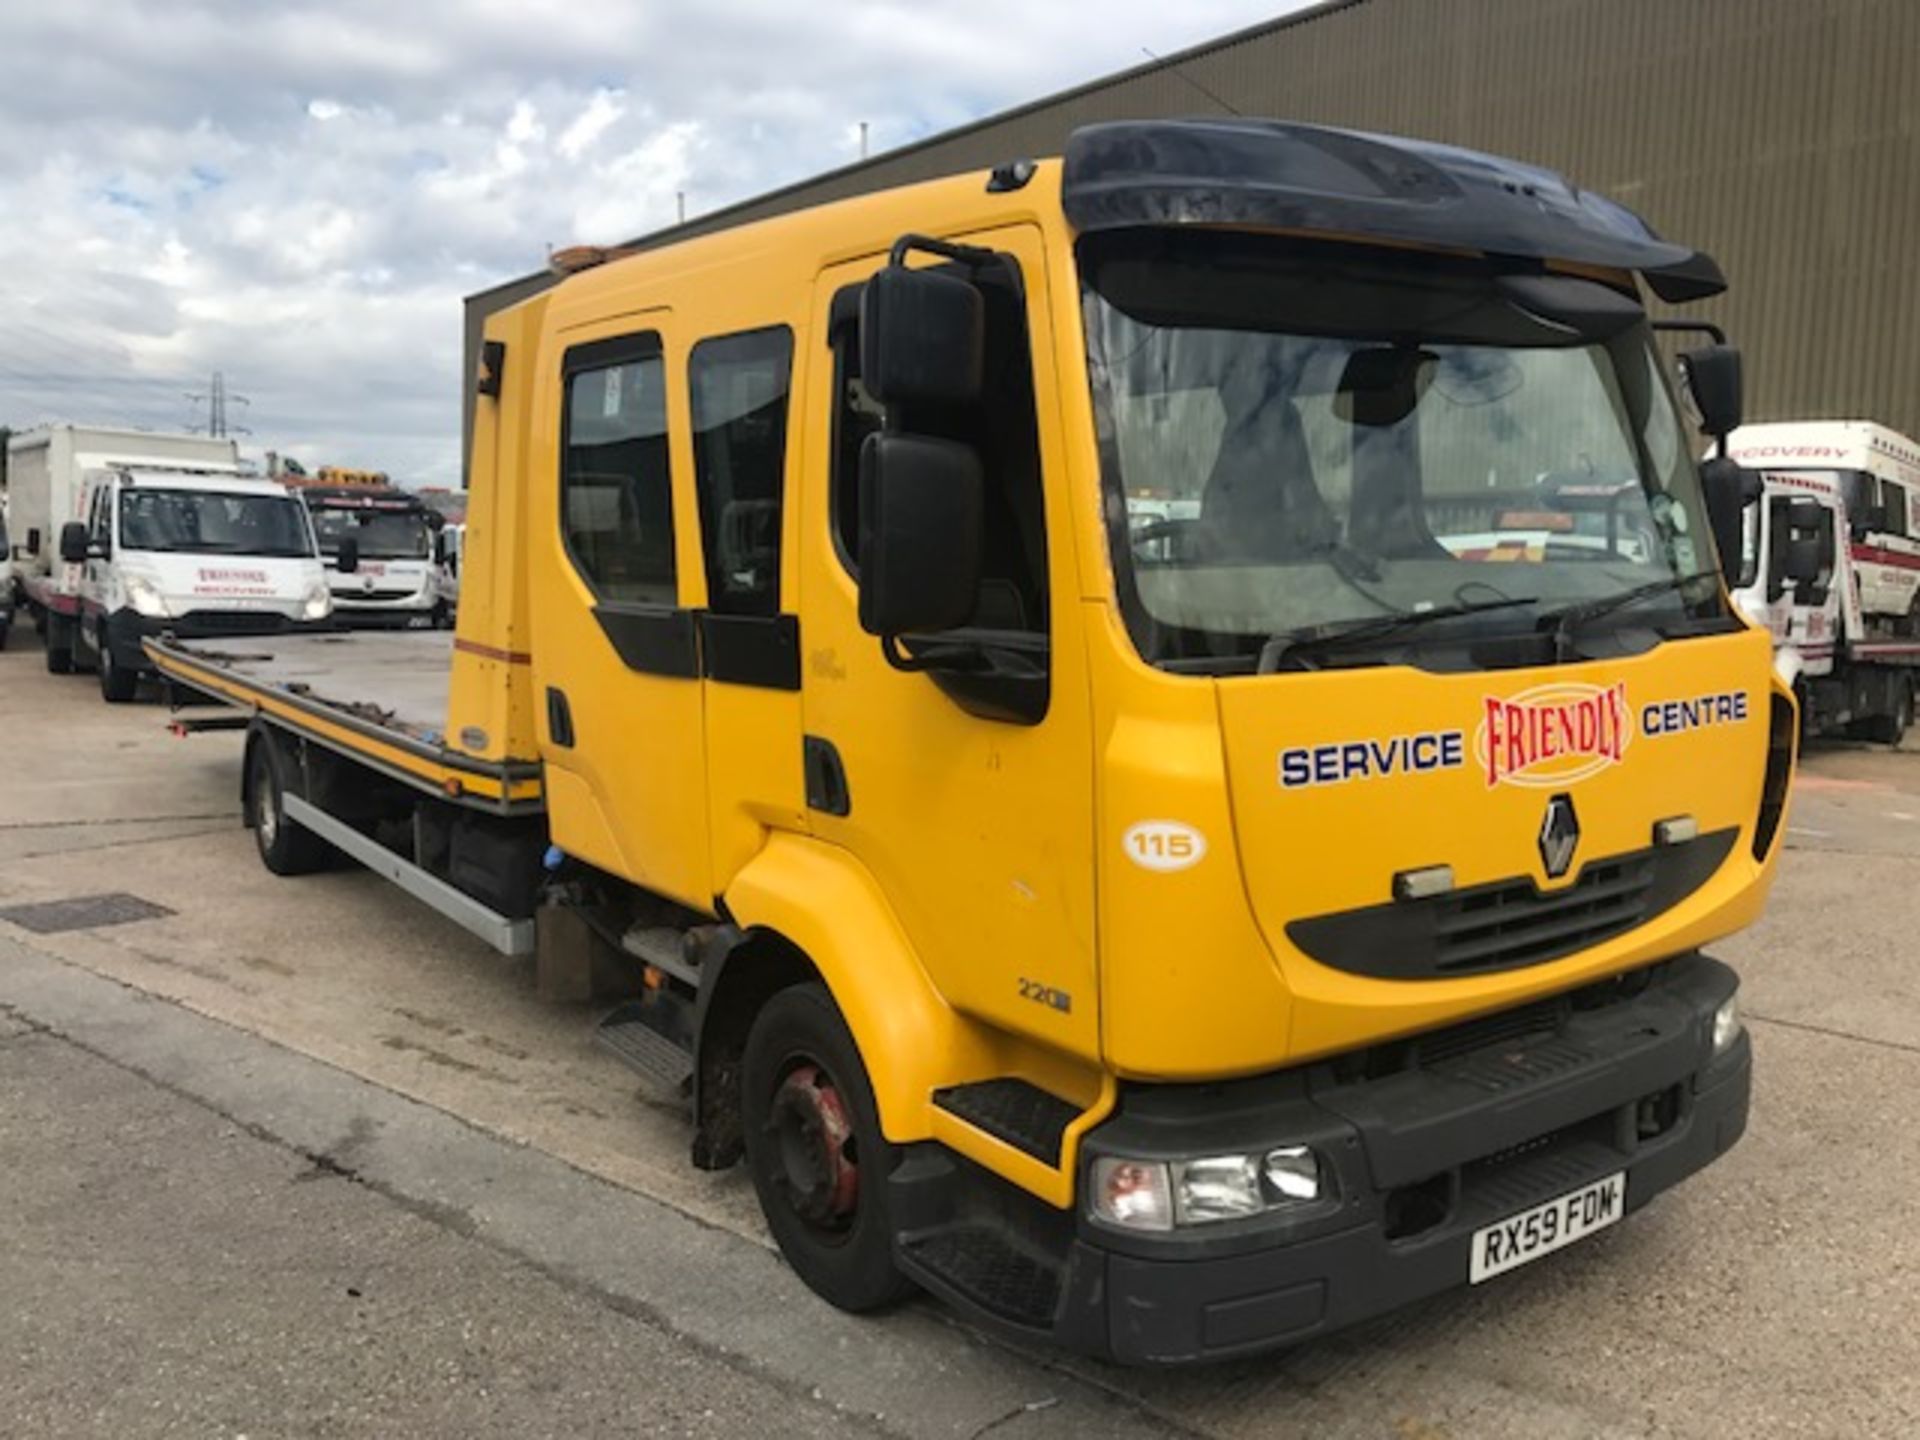 2010 Renault Midlum 220DXi 12t crew cab breakdown recovery vehicle with spec. lift, J&J conversion - Image 2 of 13